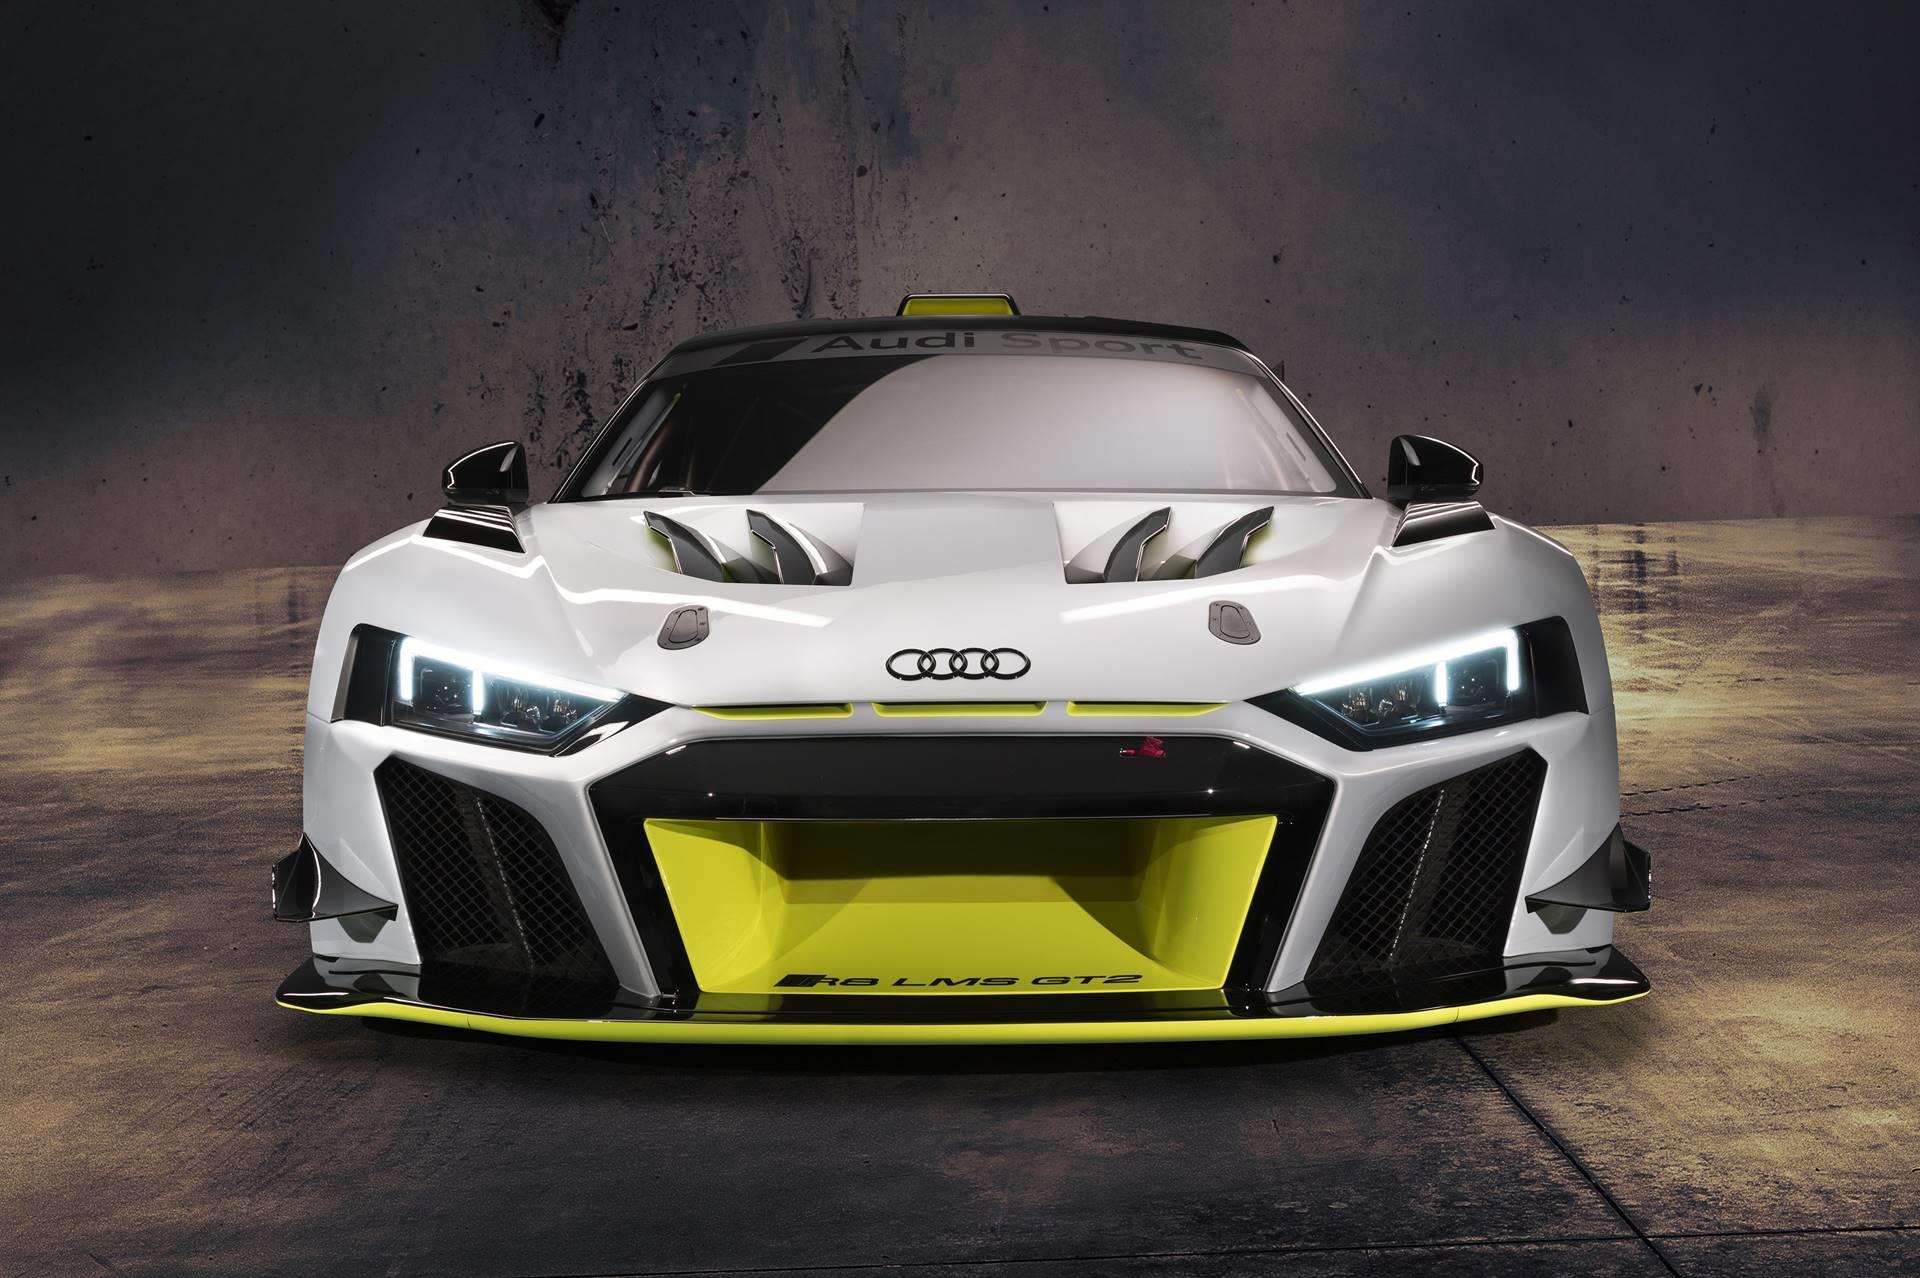 Audi R8 LMS GT2 News and Information, Research, and Pricing